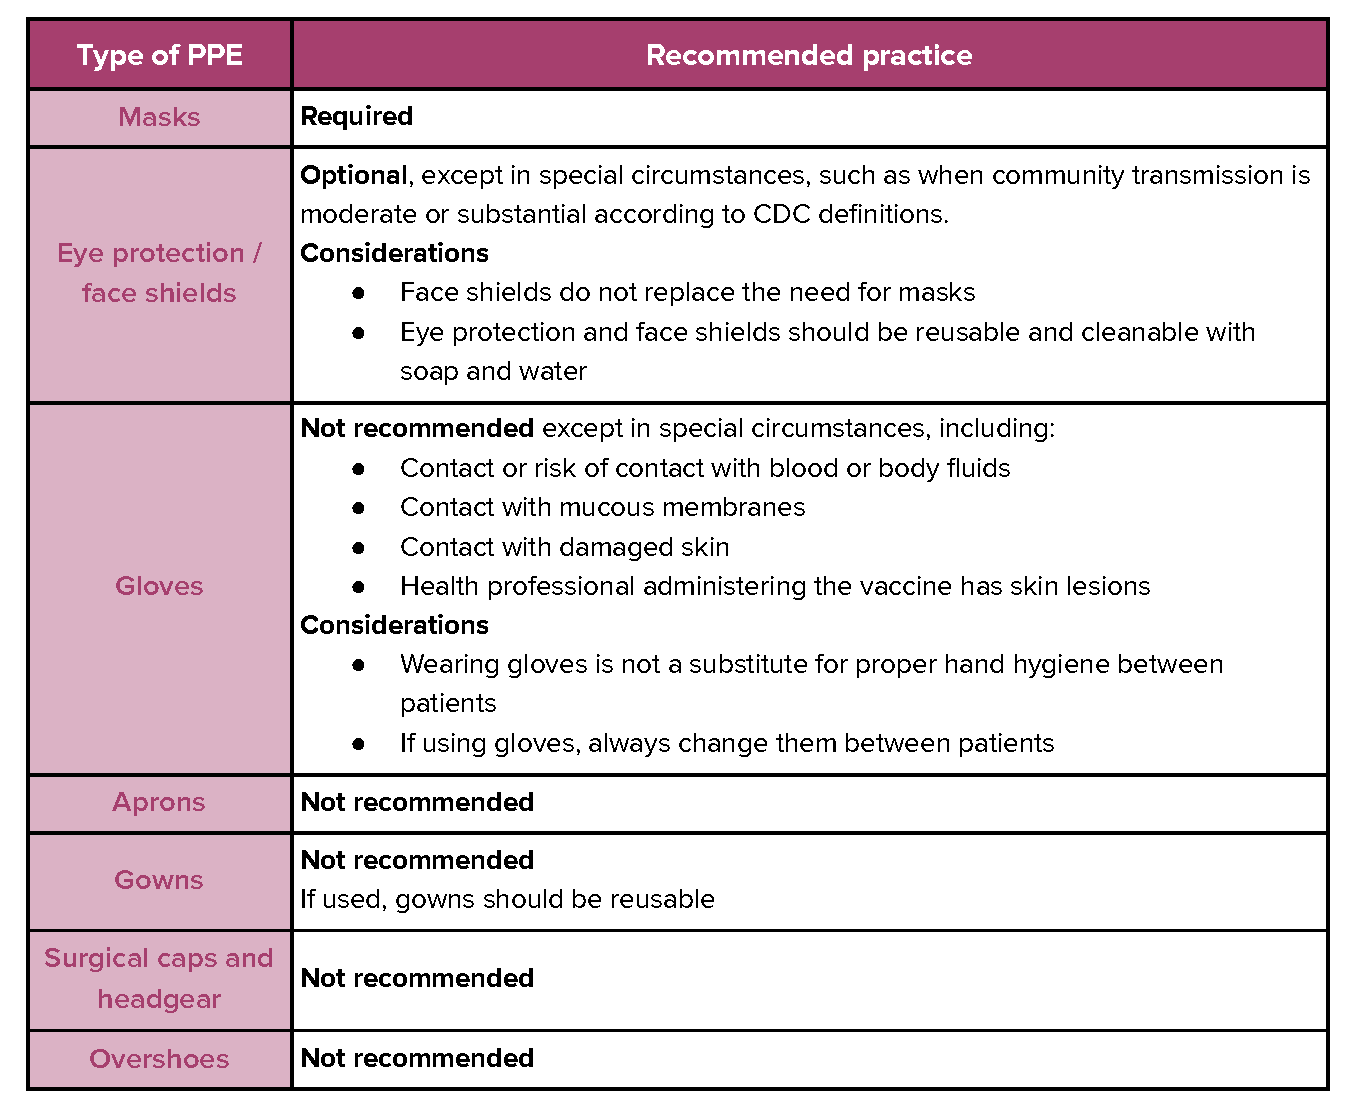 PPE practices chart